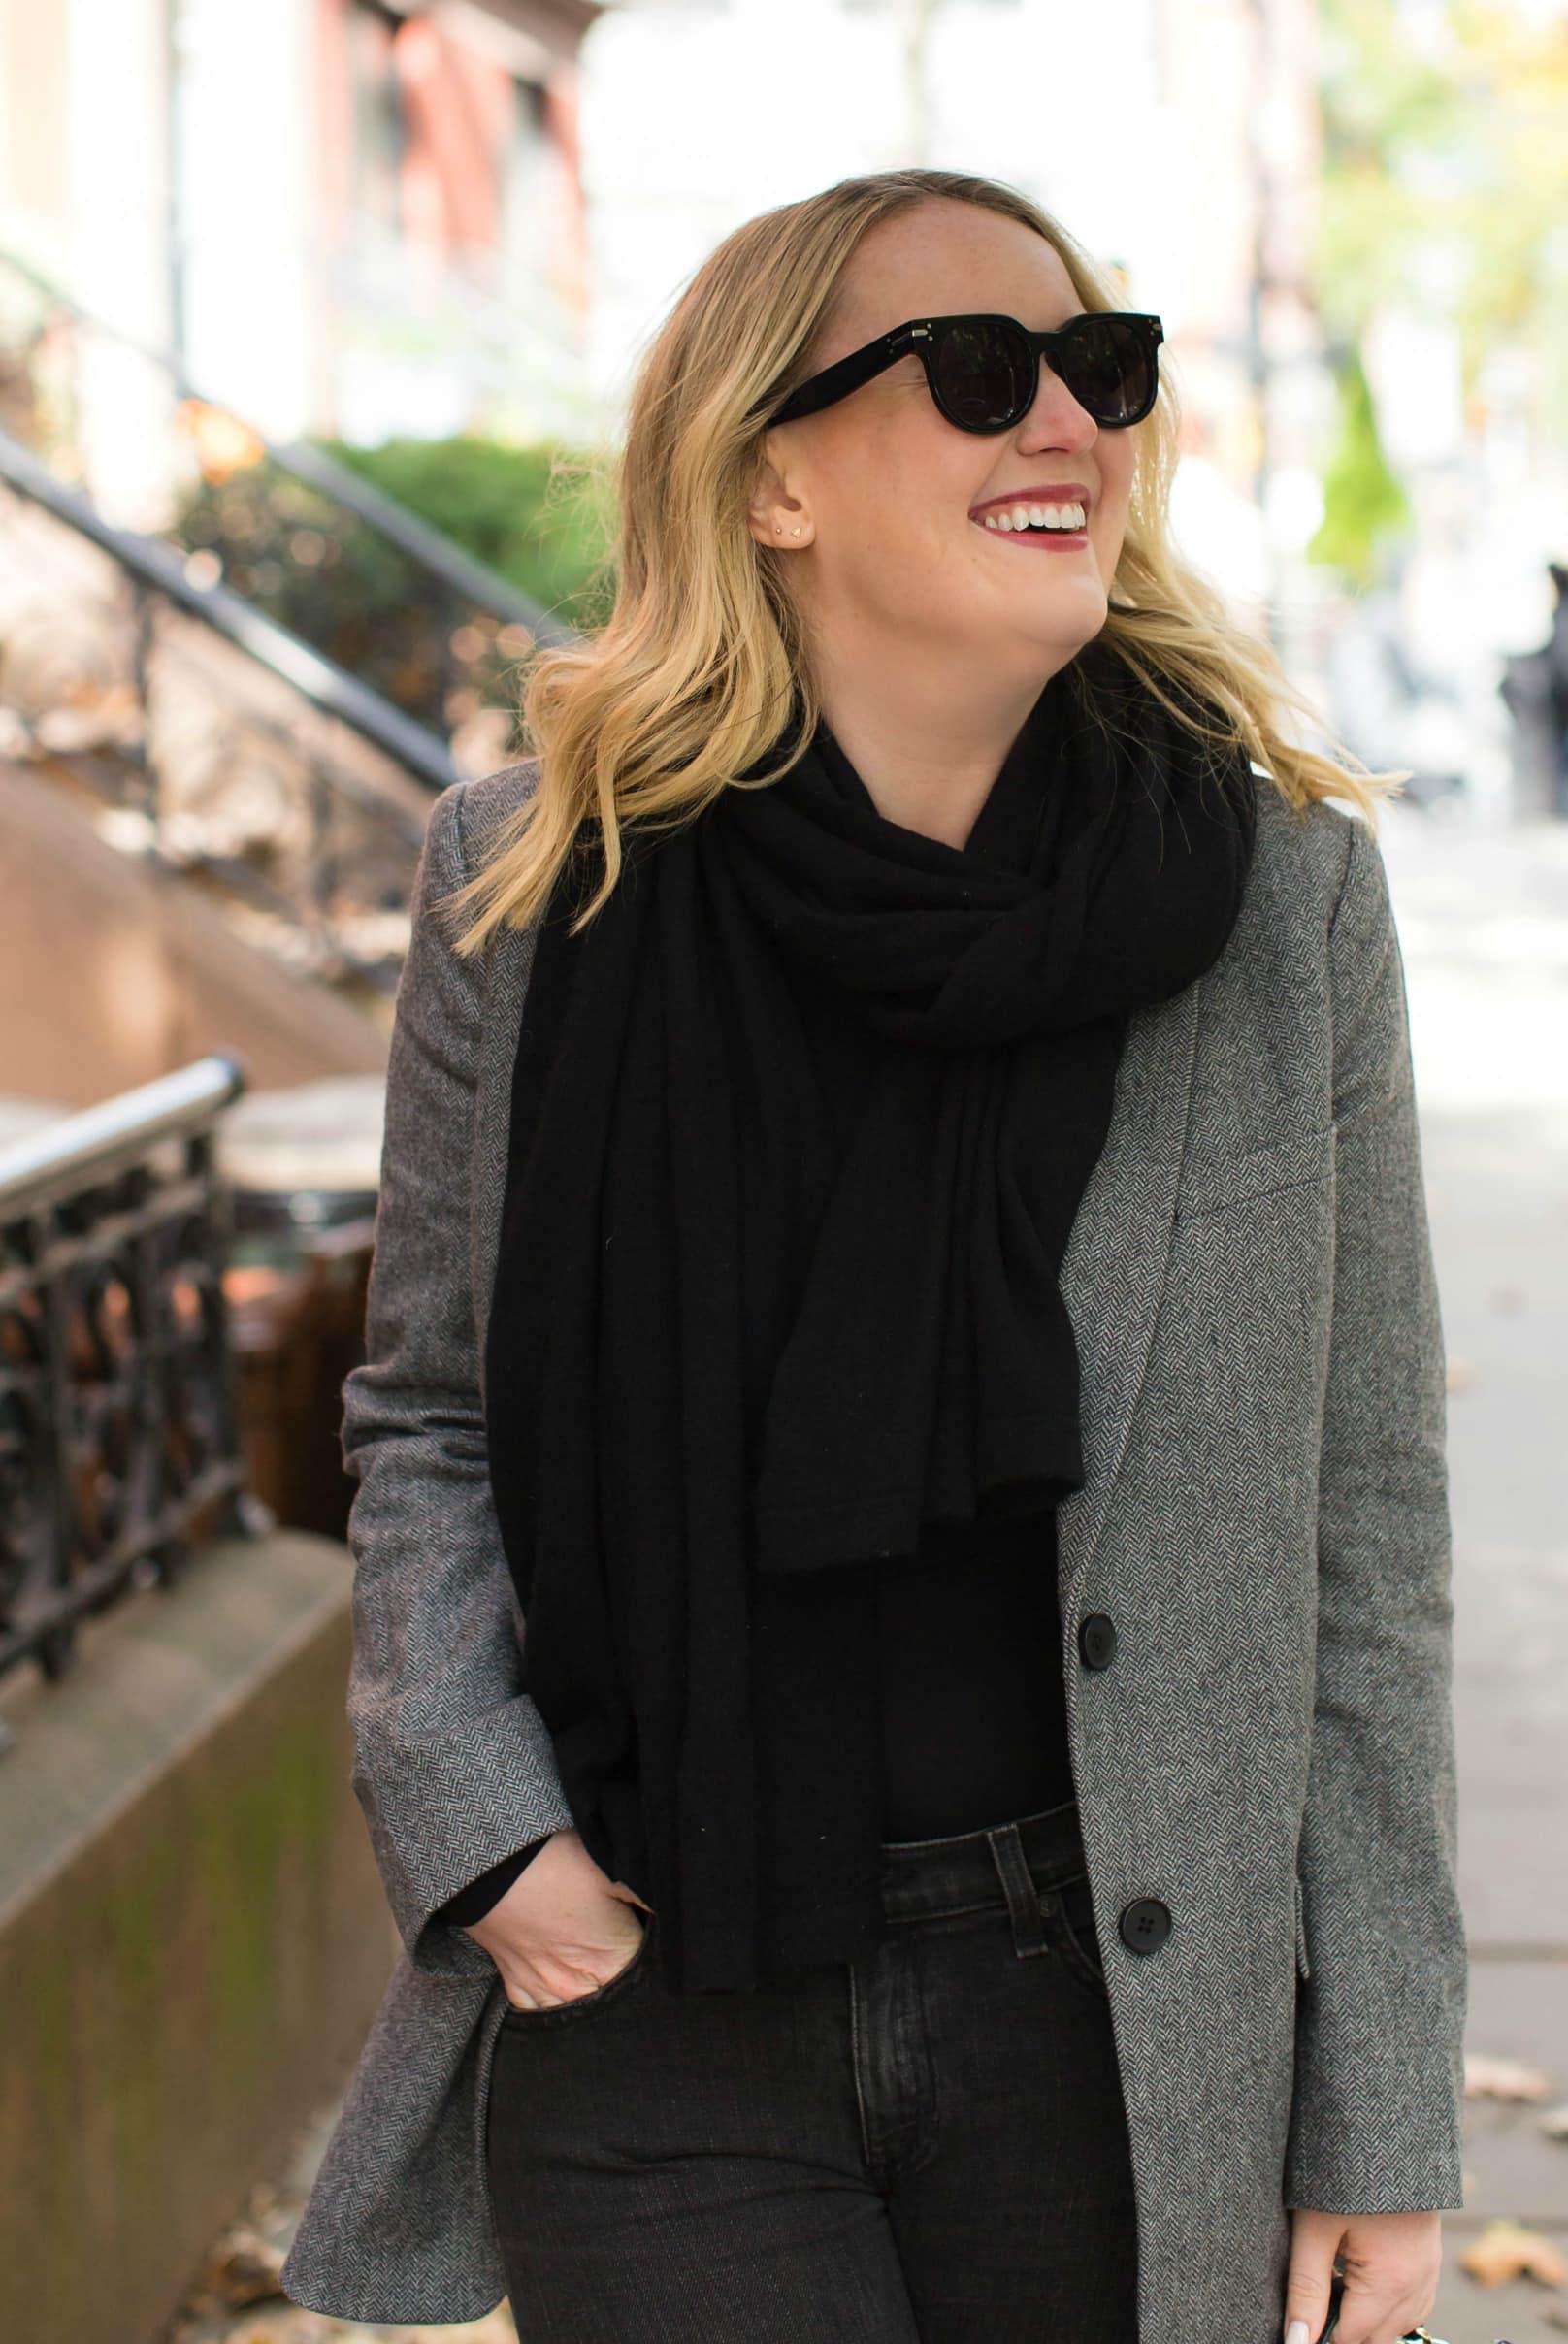 Meghan Donovan of wit & whimsy discusses affordable wardrobe essentials